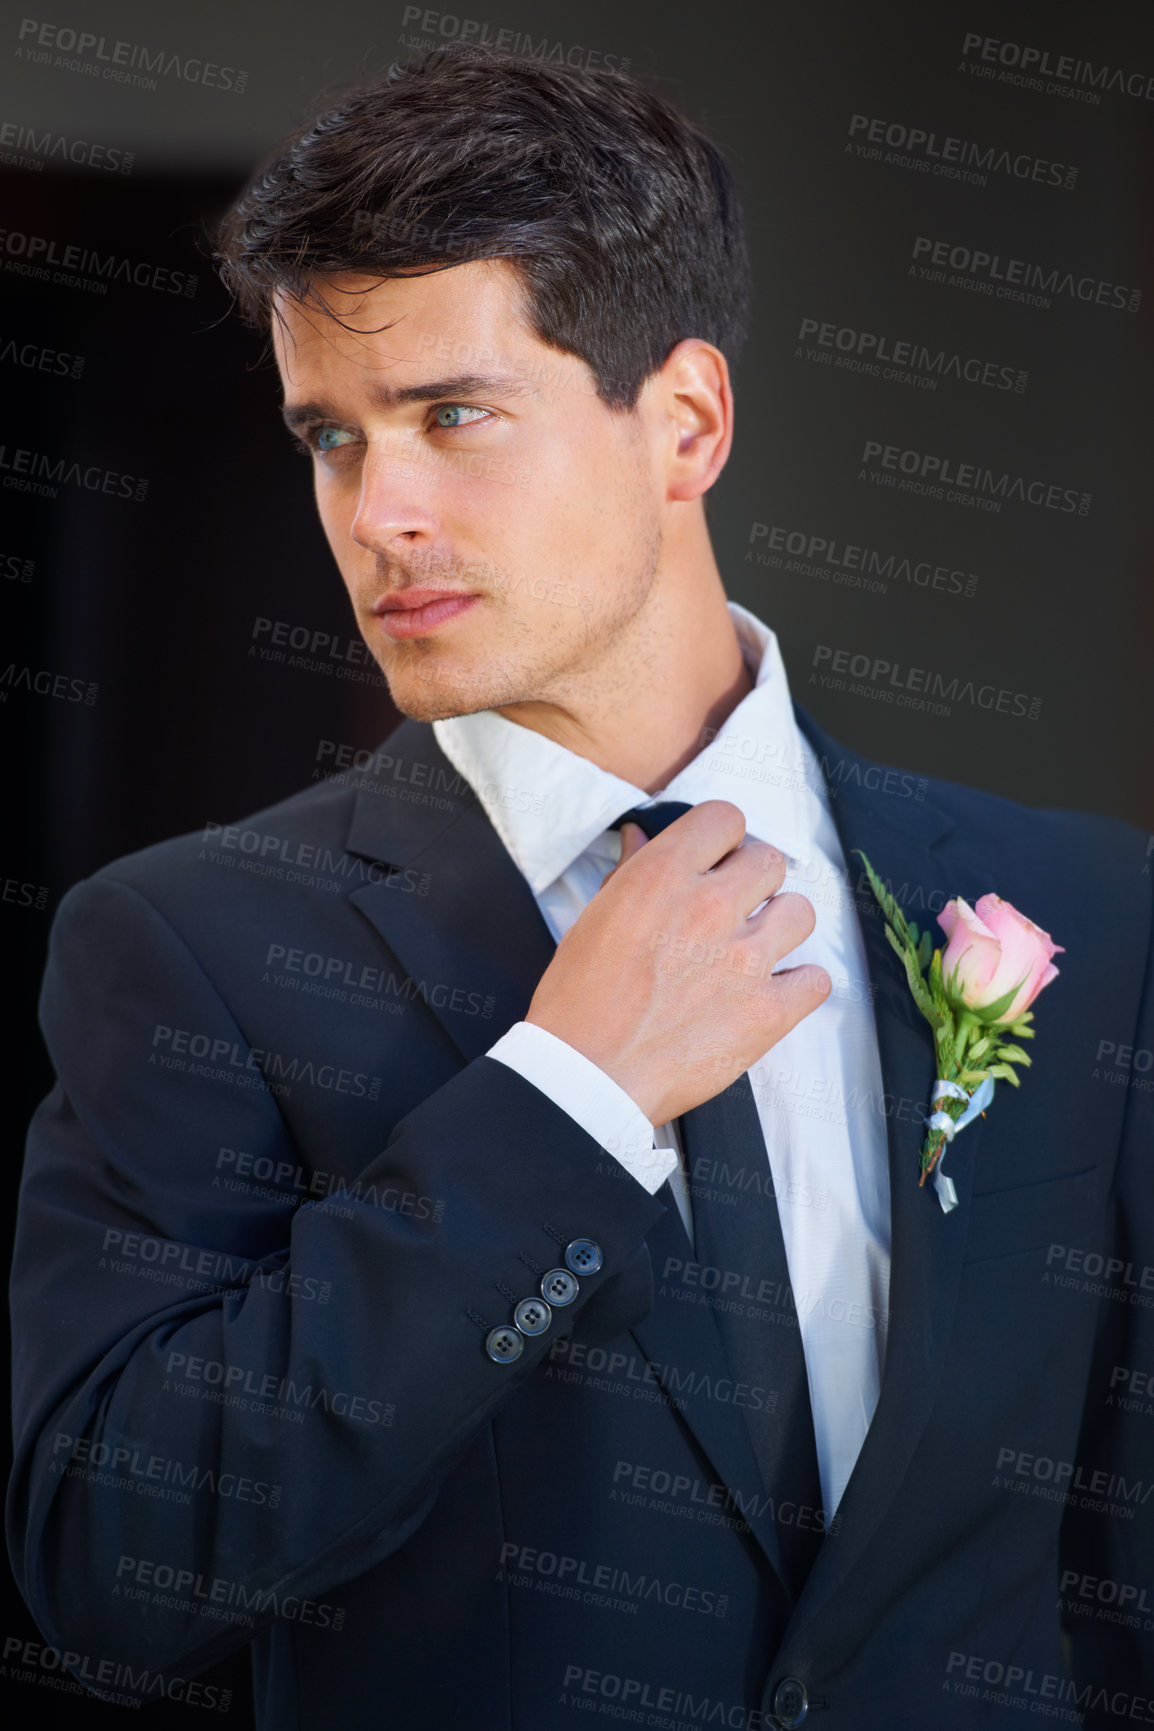 Buy stock photo A handsome groom wearing a pink rose on his jacket isolated on a black background